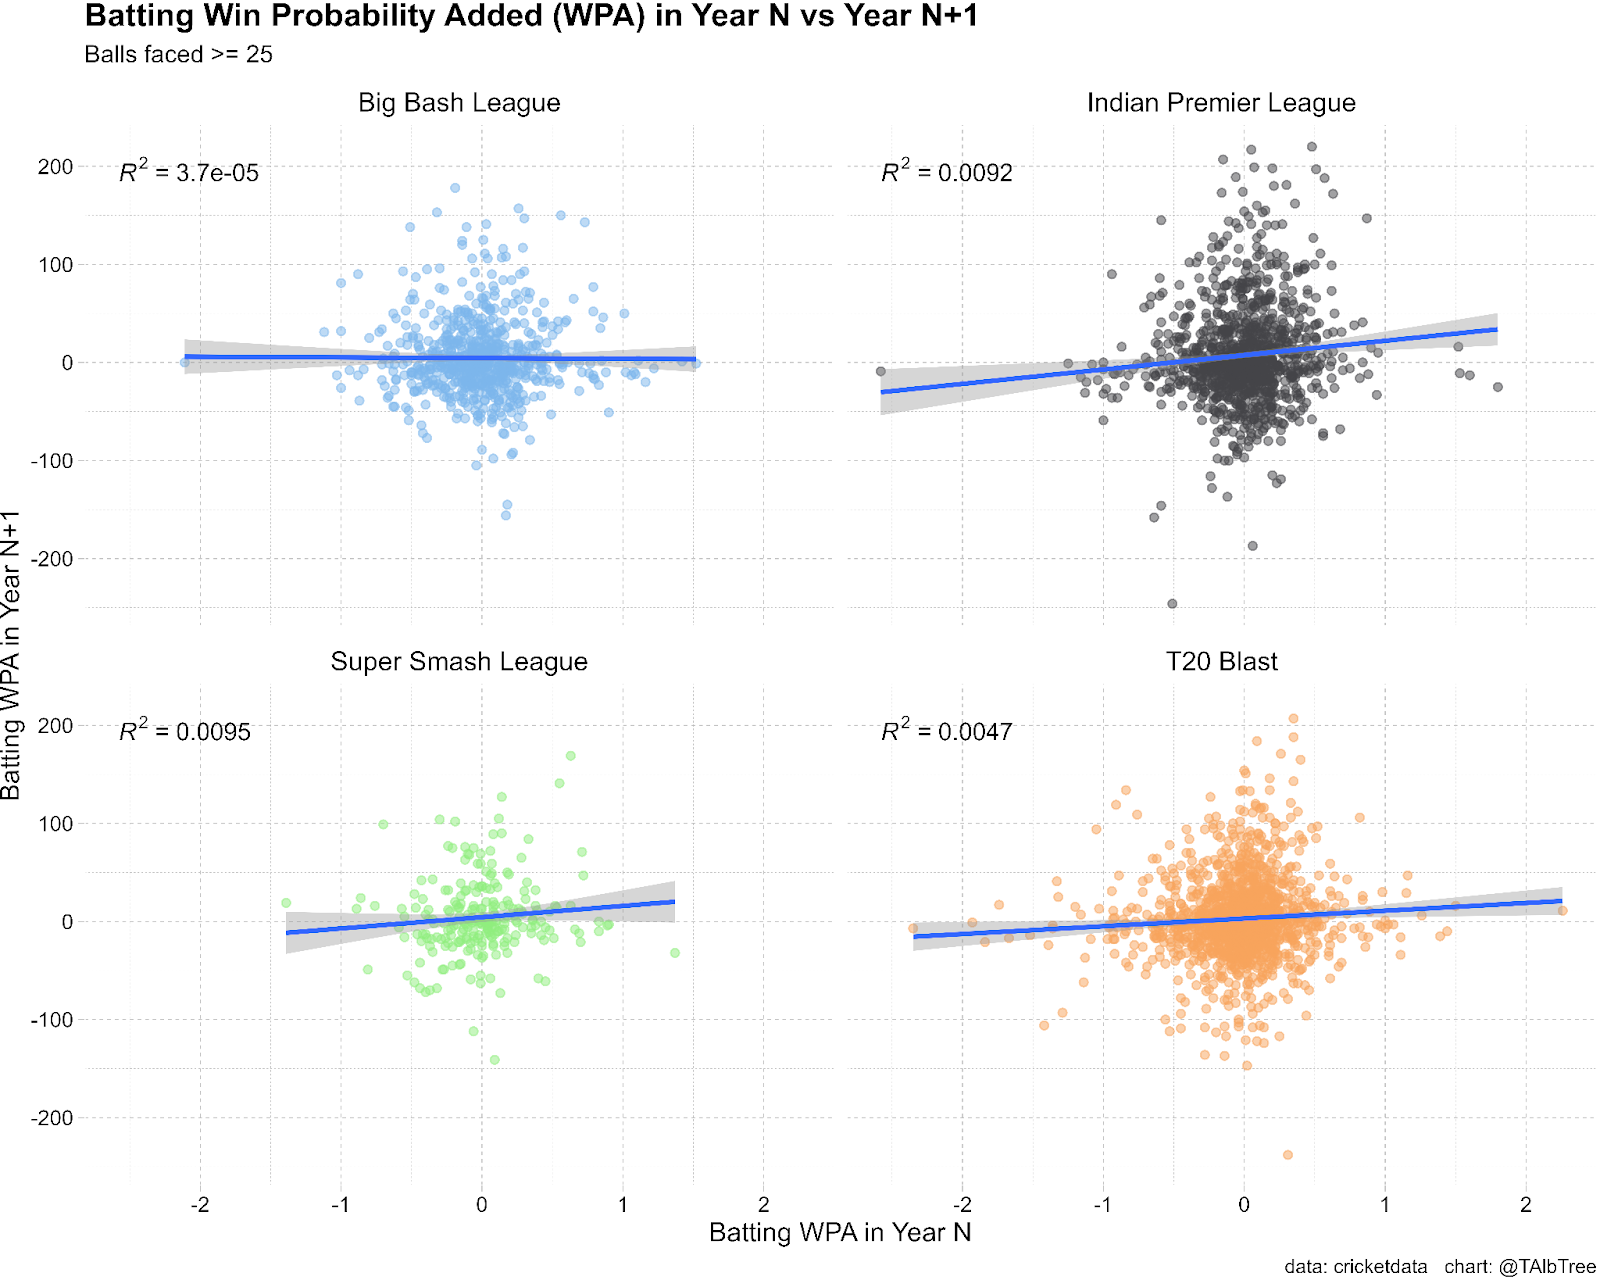 4 scatter plots of batting WPA in year N and Year N +1 across the four major Twenty20 competitions that have played more than one year (Big Bash, Indian Premier League, Super Smash League, T20 Blast). No correlation